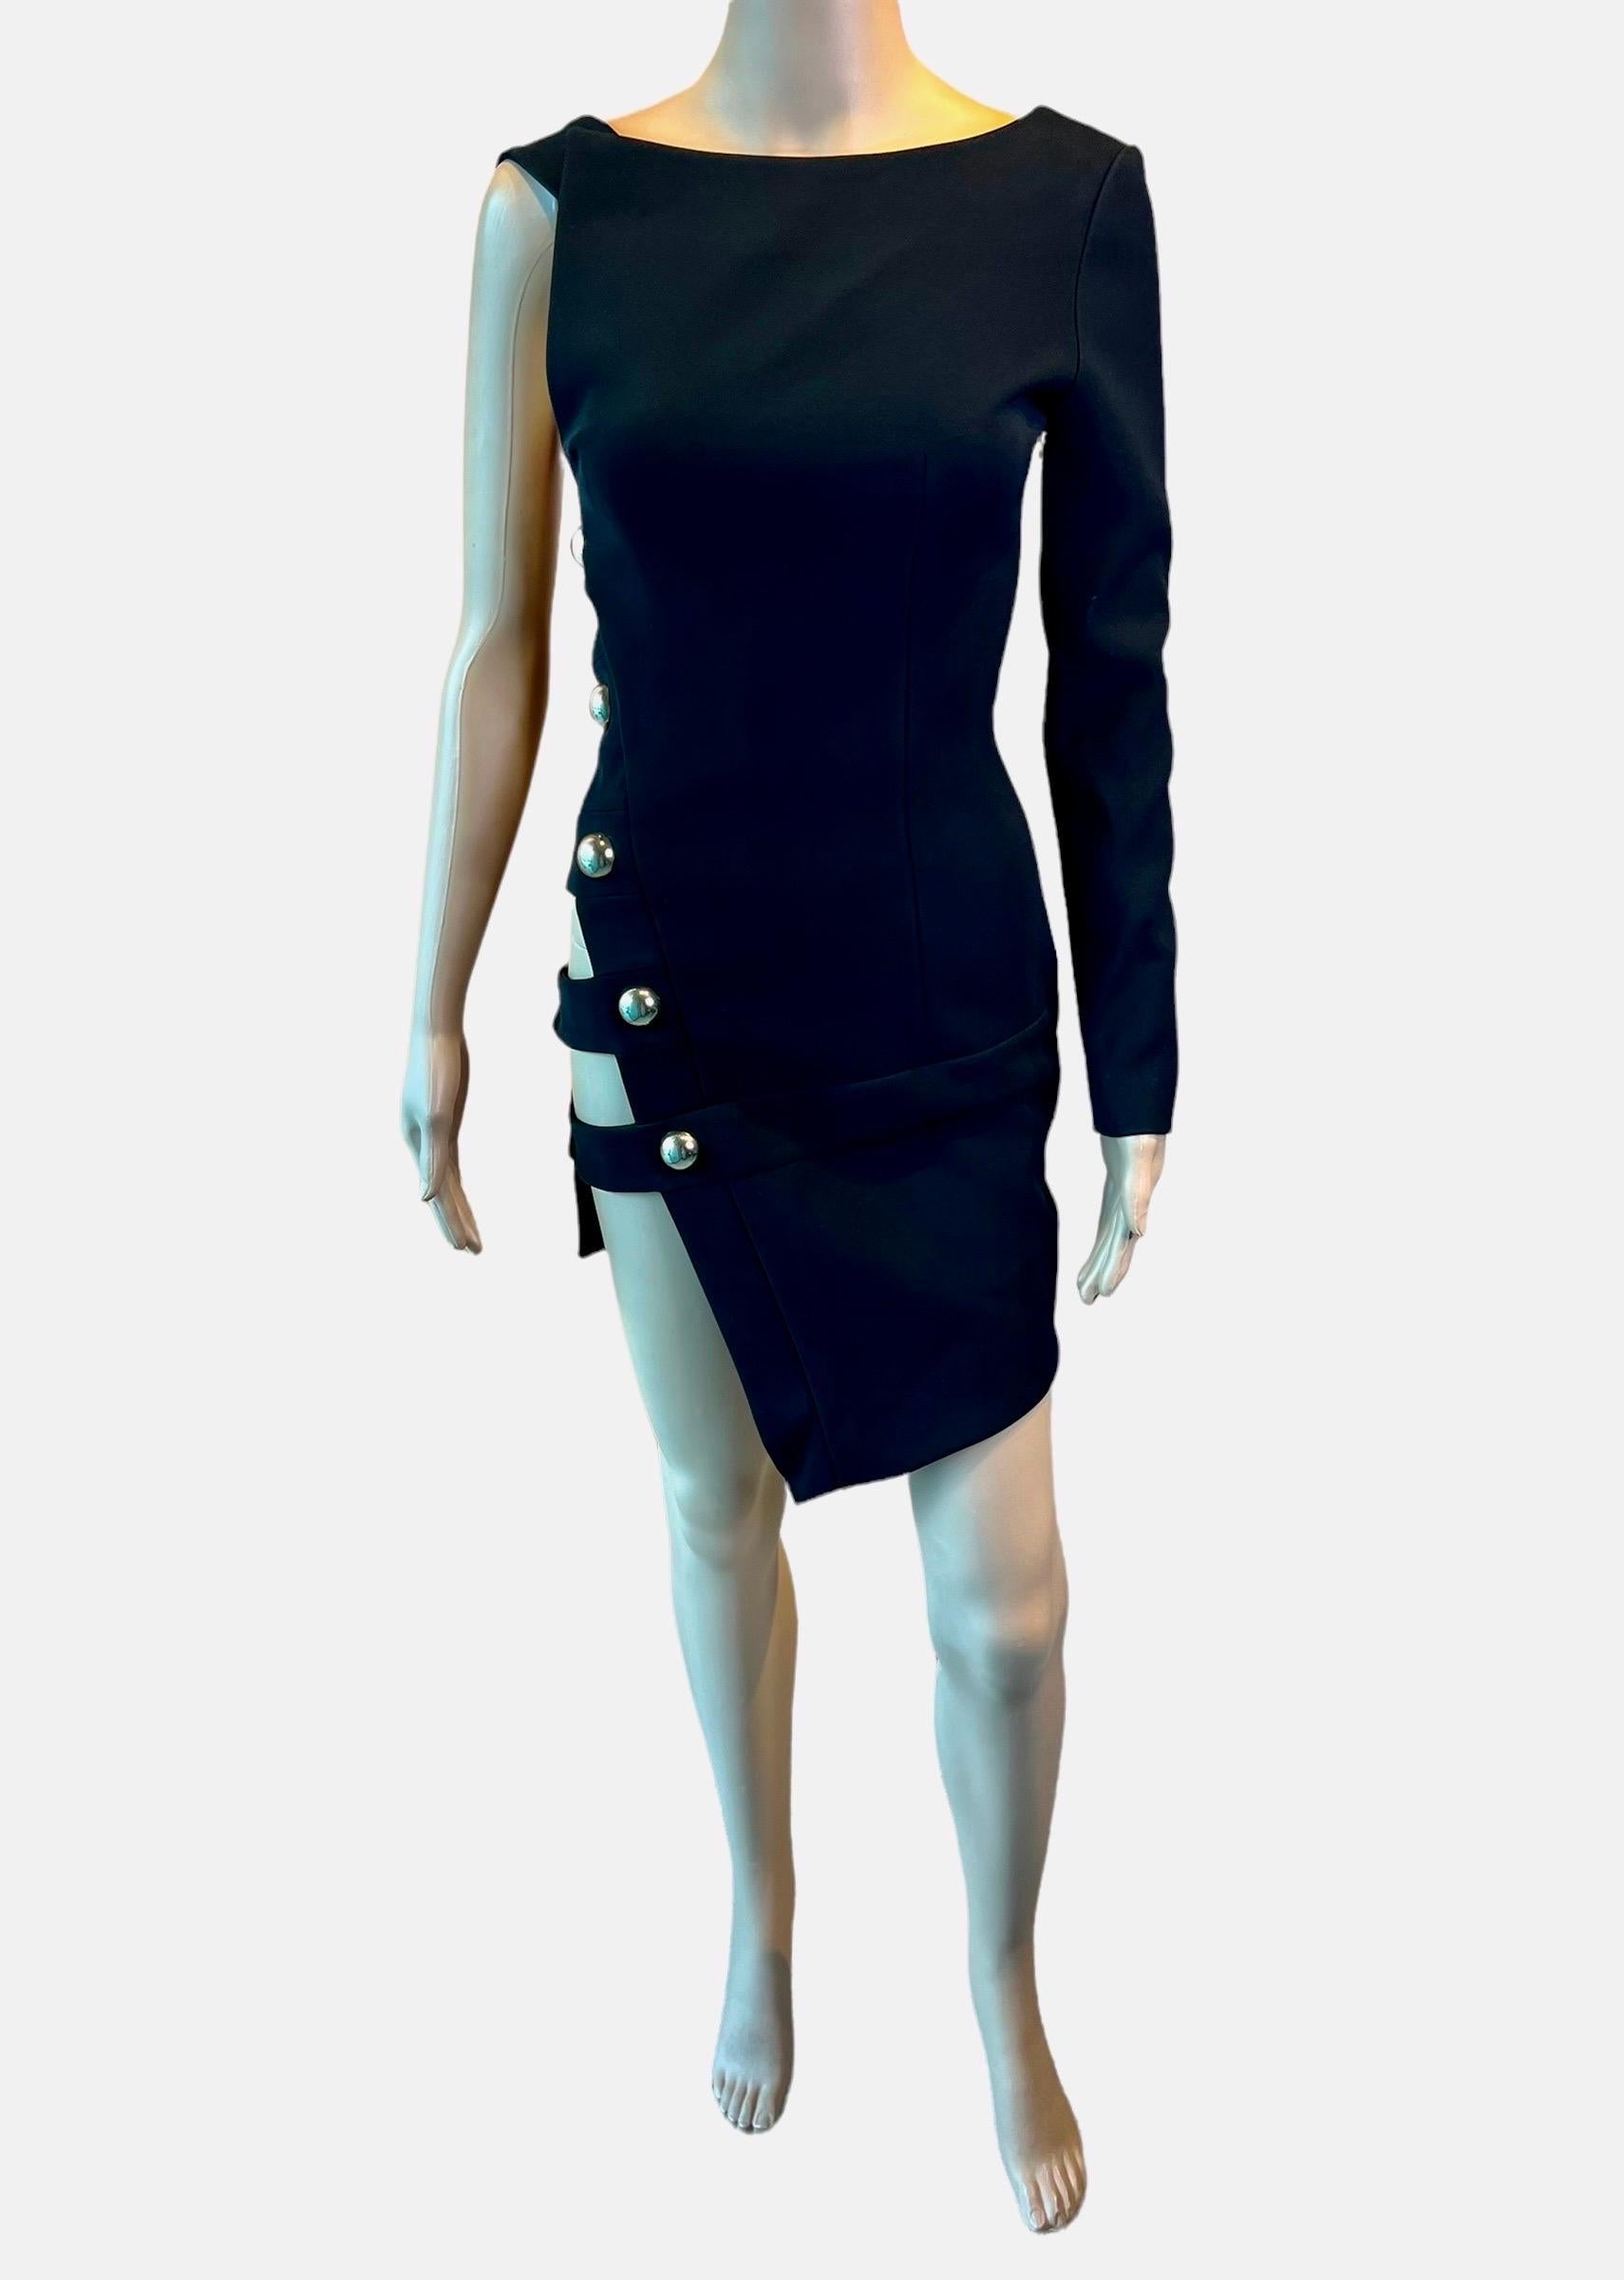 Anthony Vaccarello S/S 2014 Runway Cutout One Sleeve Black Mini Dress For Sale 12